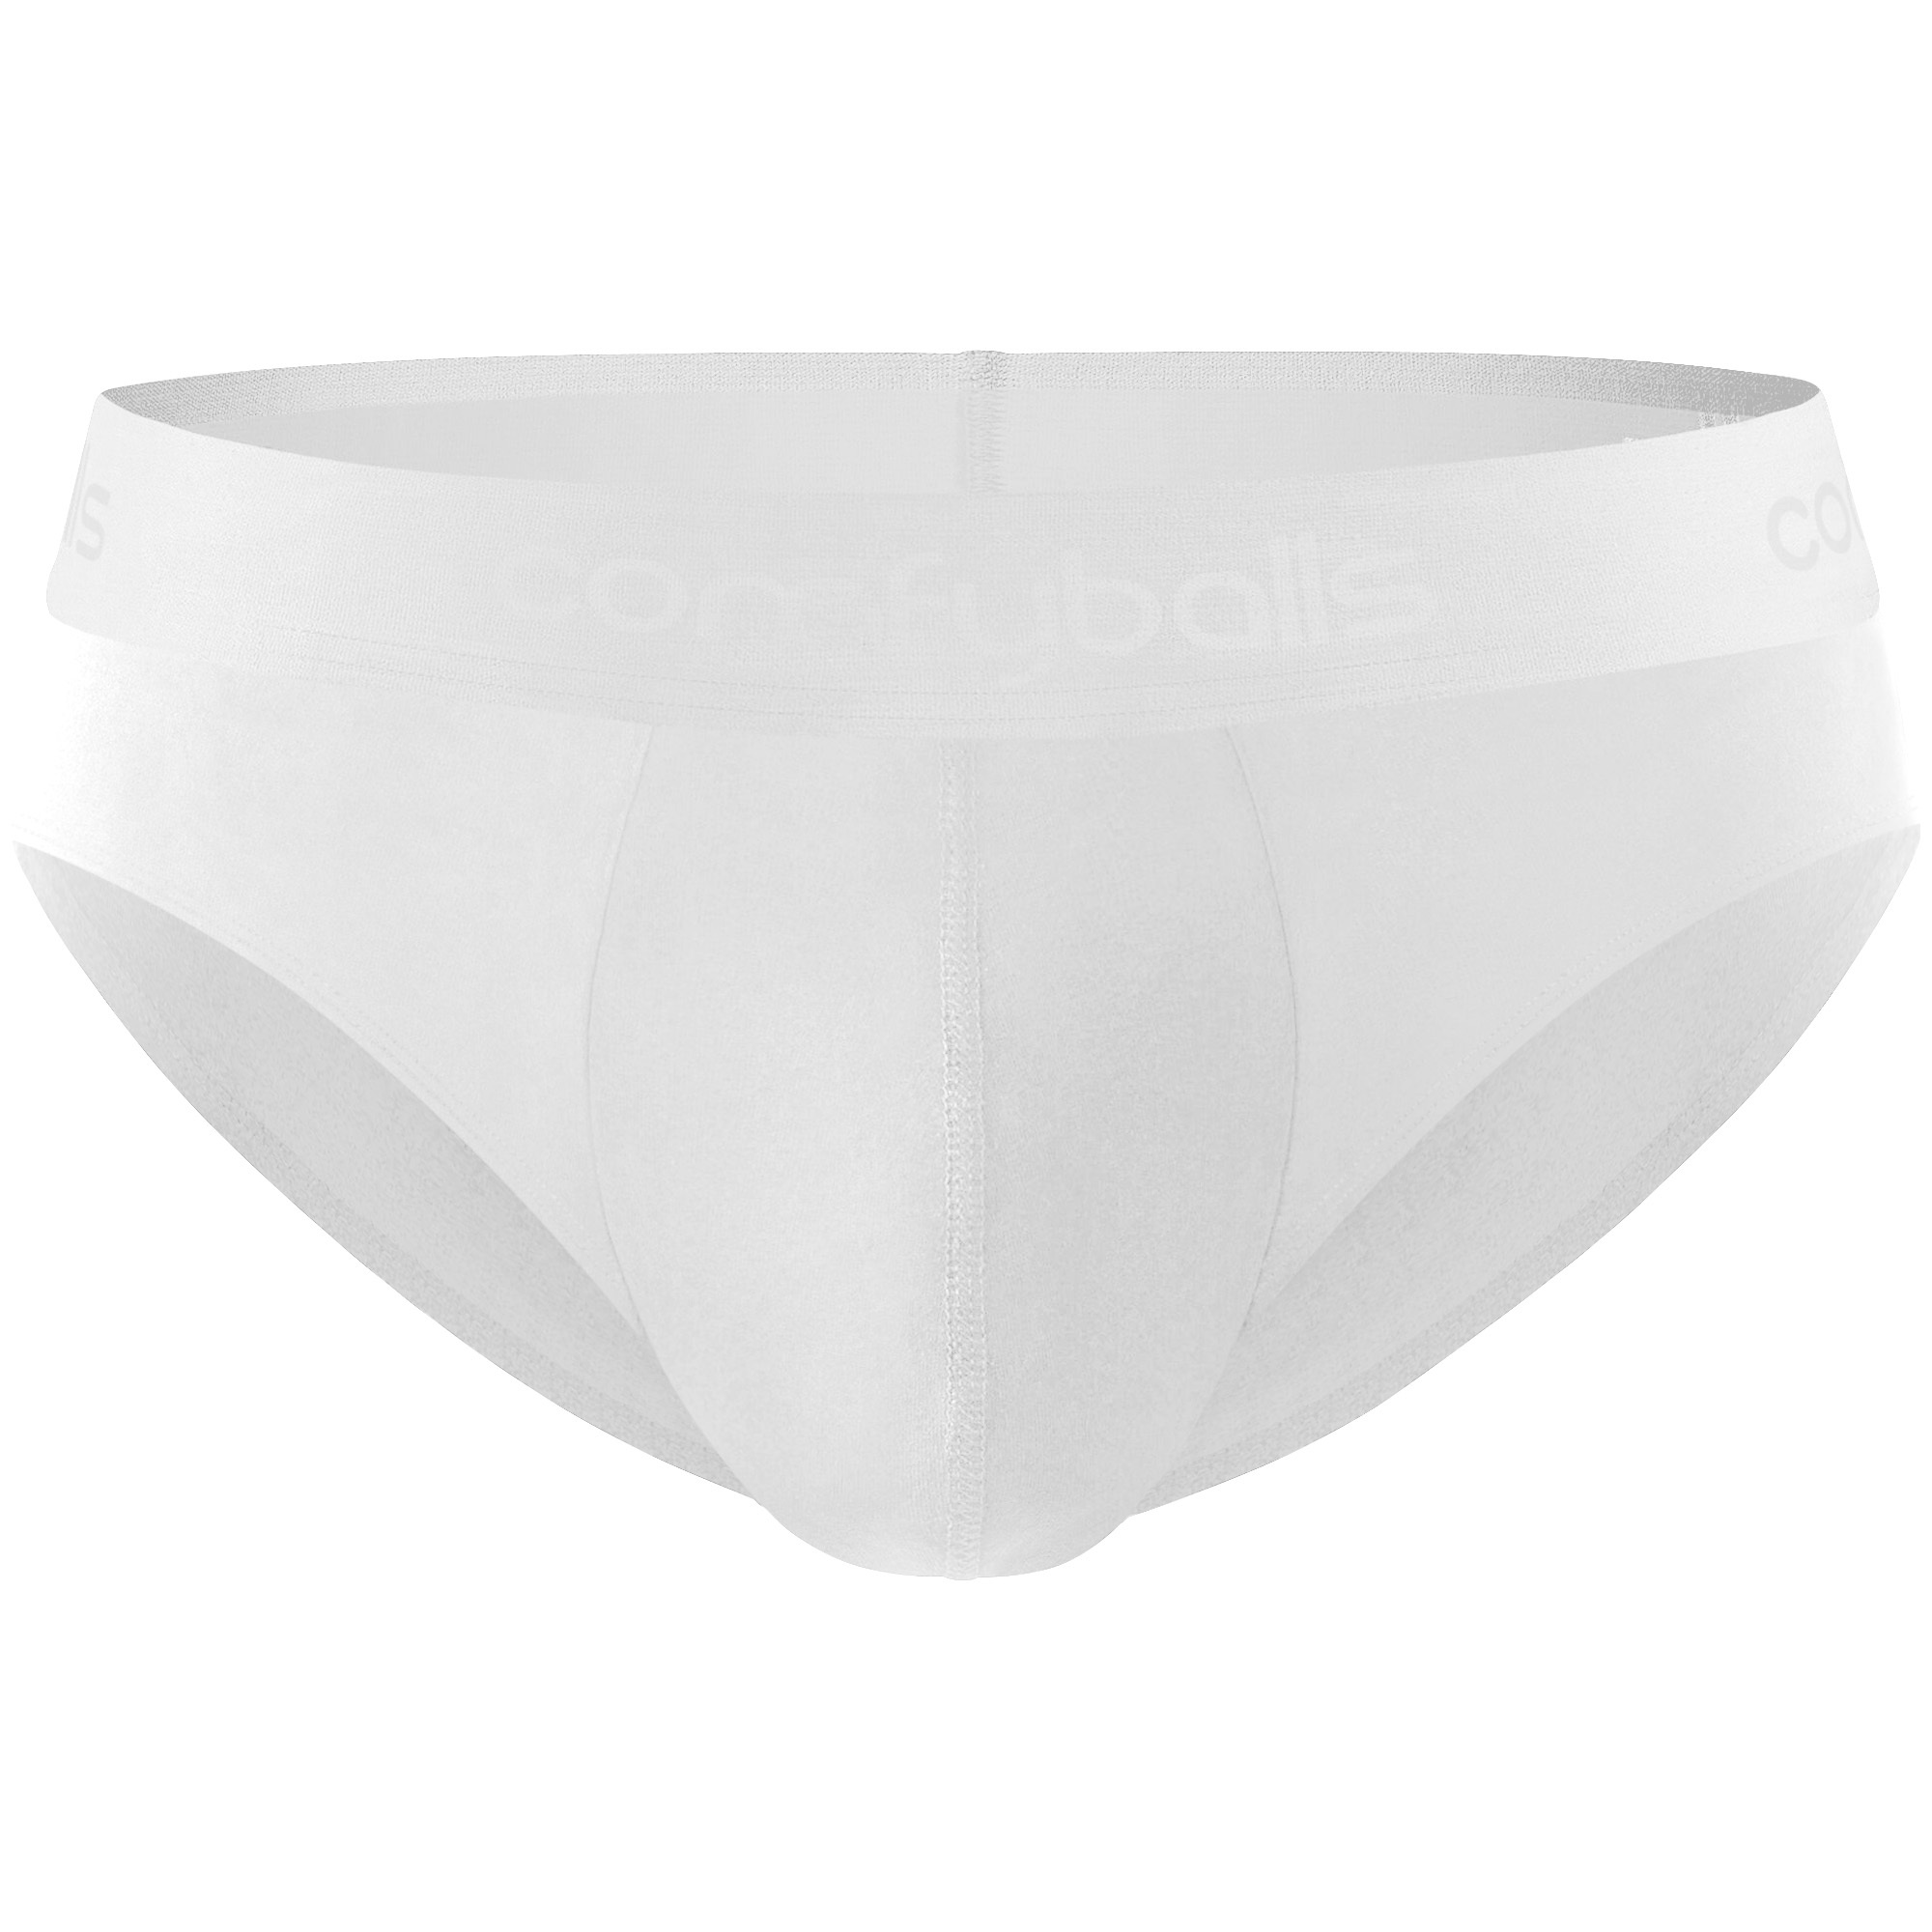 Comfyballs Ghost White Cotton Brief (2-pack) 